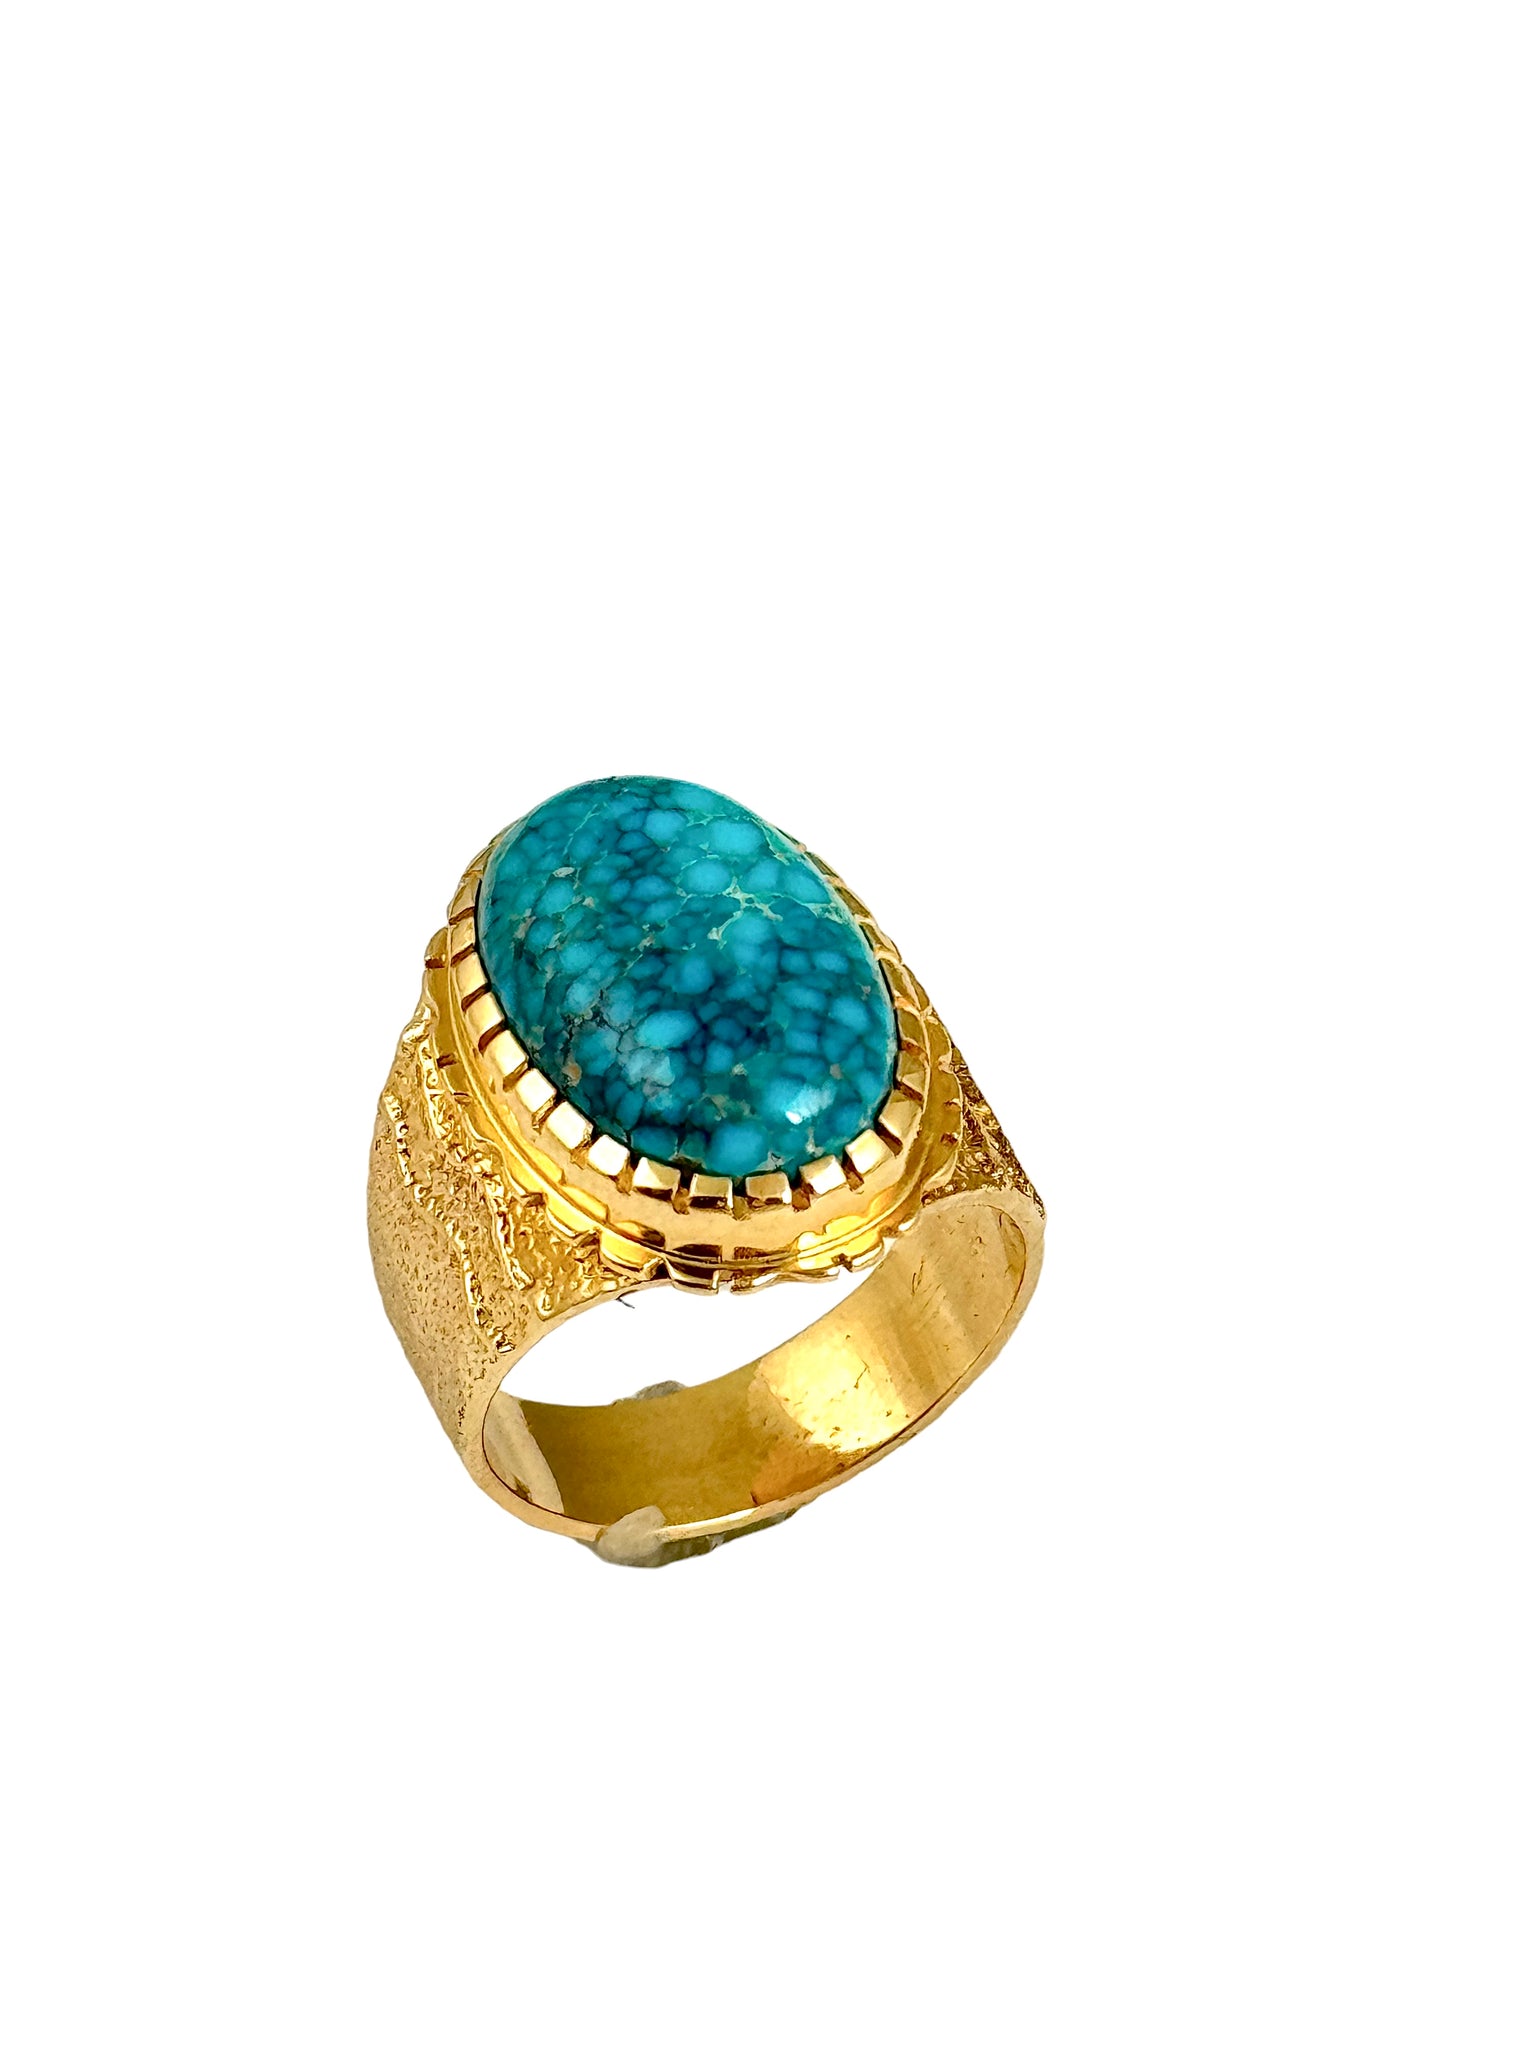 SOLD Ric Charlie Gold and Turquoise Ring